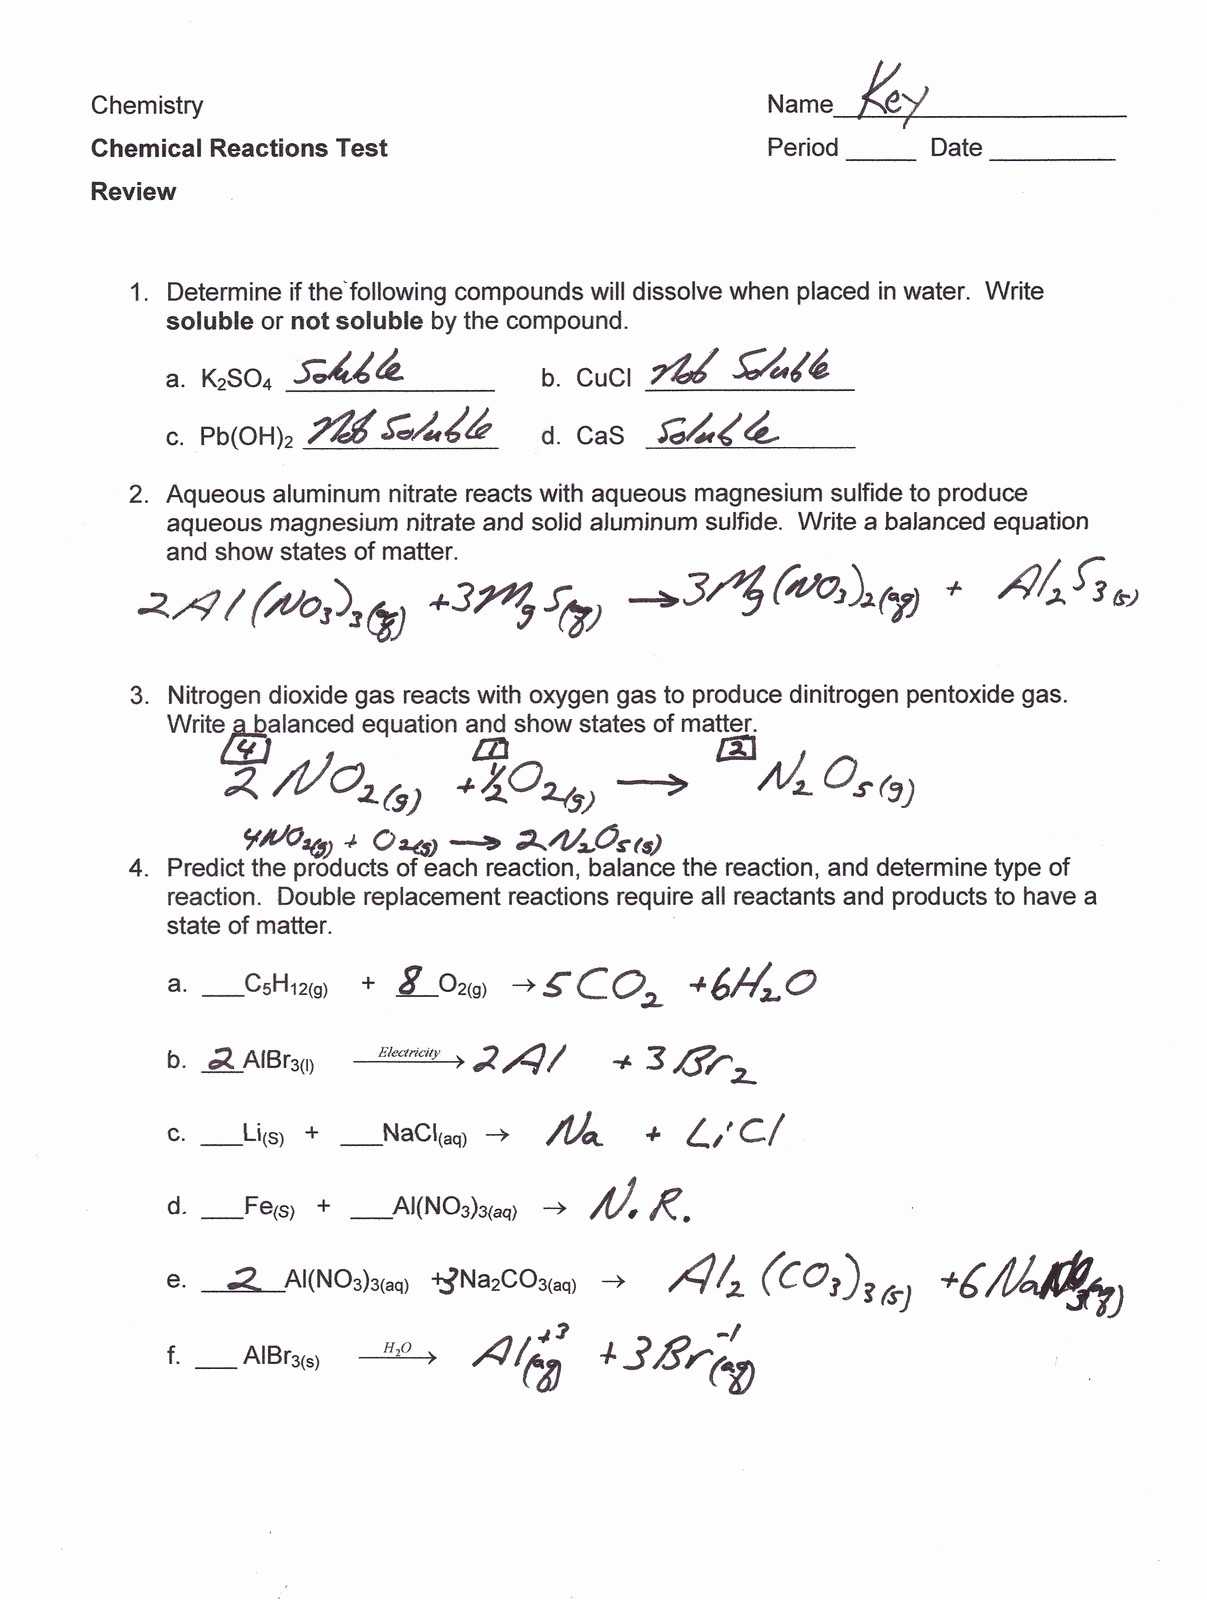 Balancing Chemical Reactions Worksheet Answers together with Predicting Products Worksheet Answers Kidz Activities